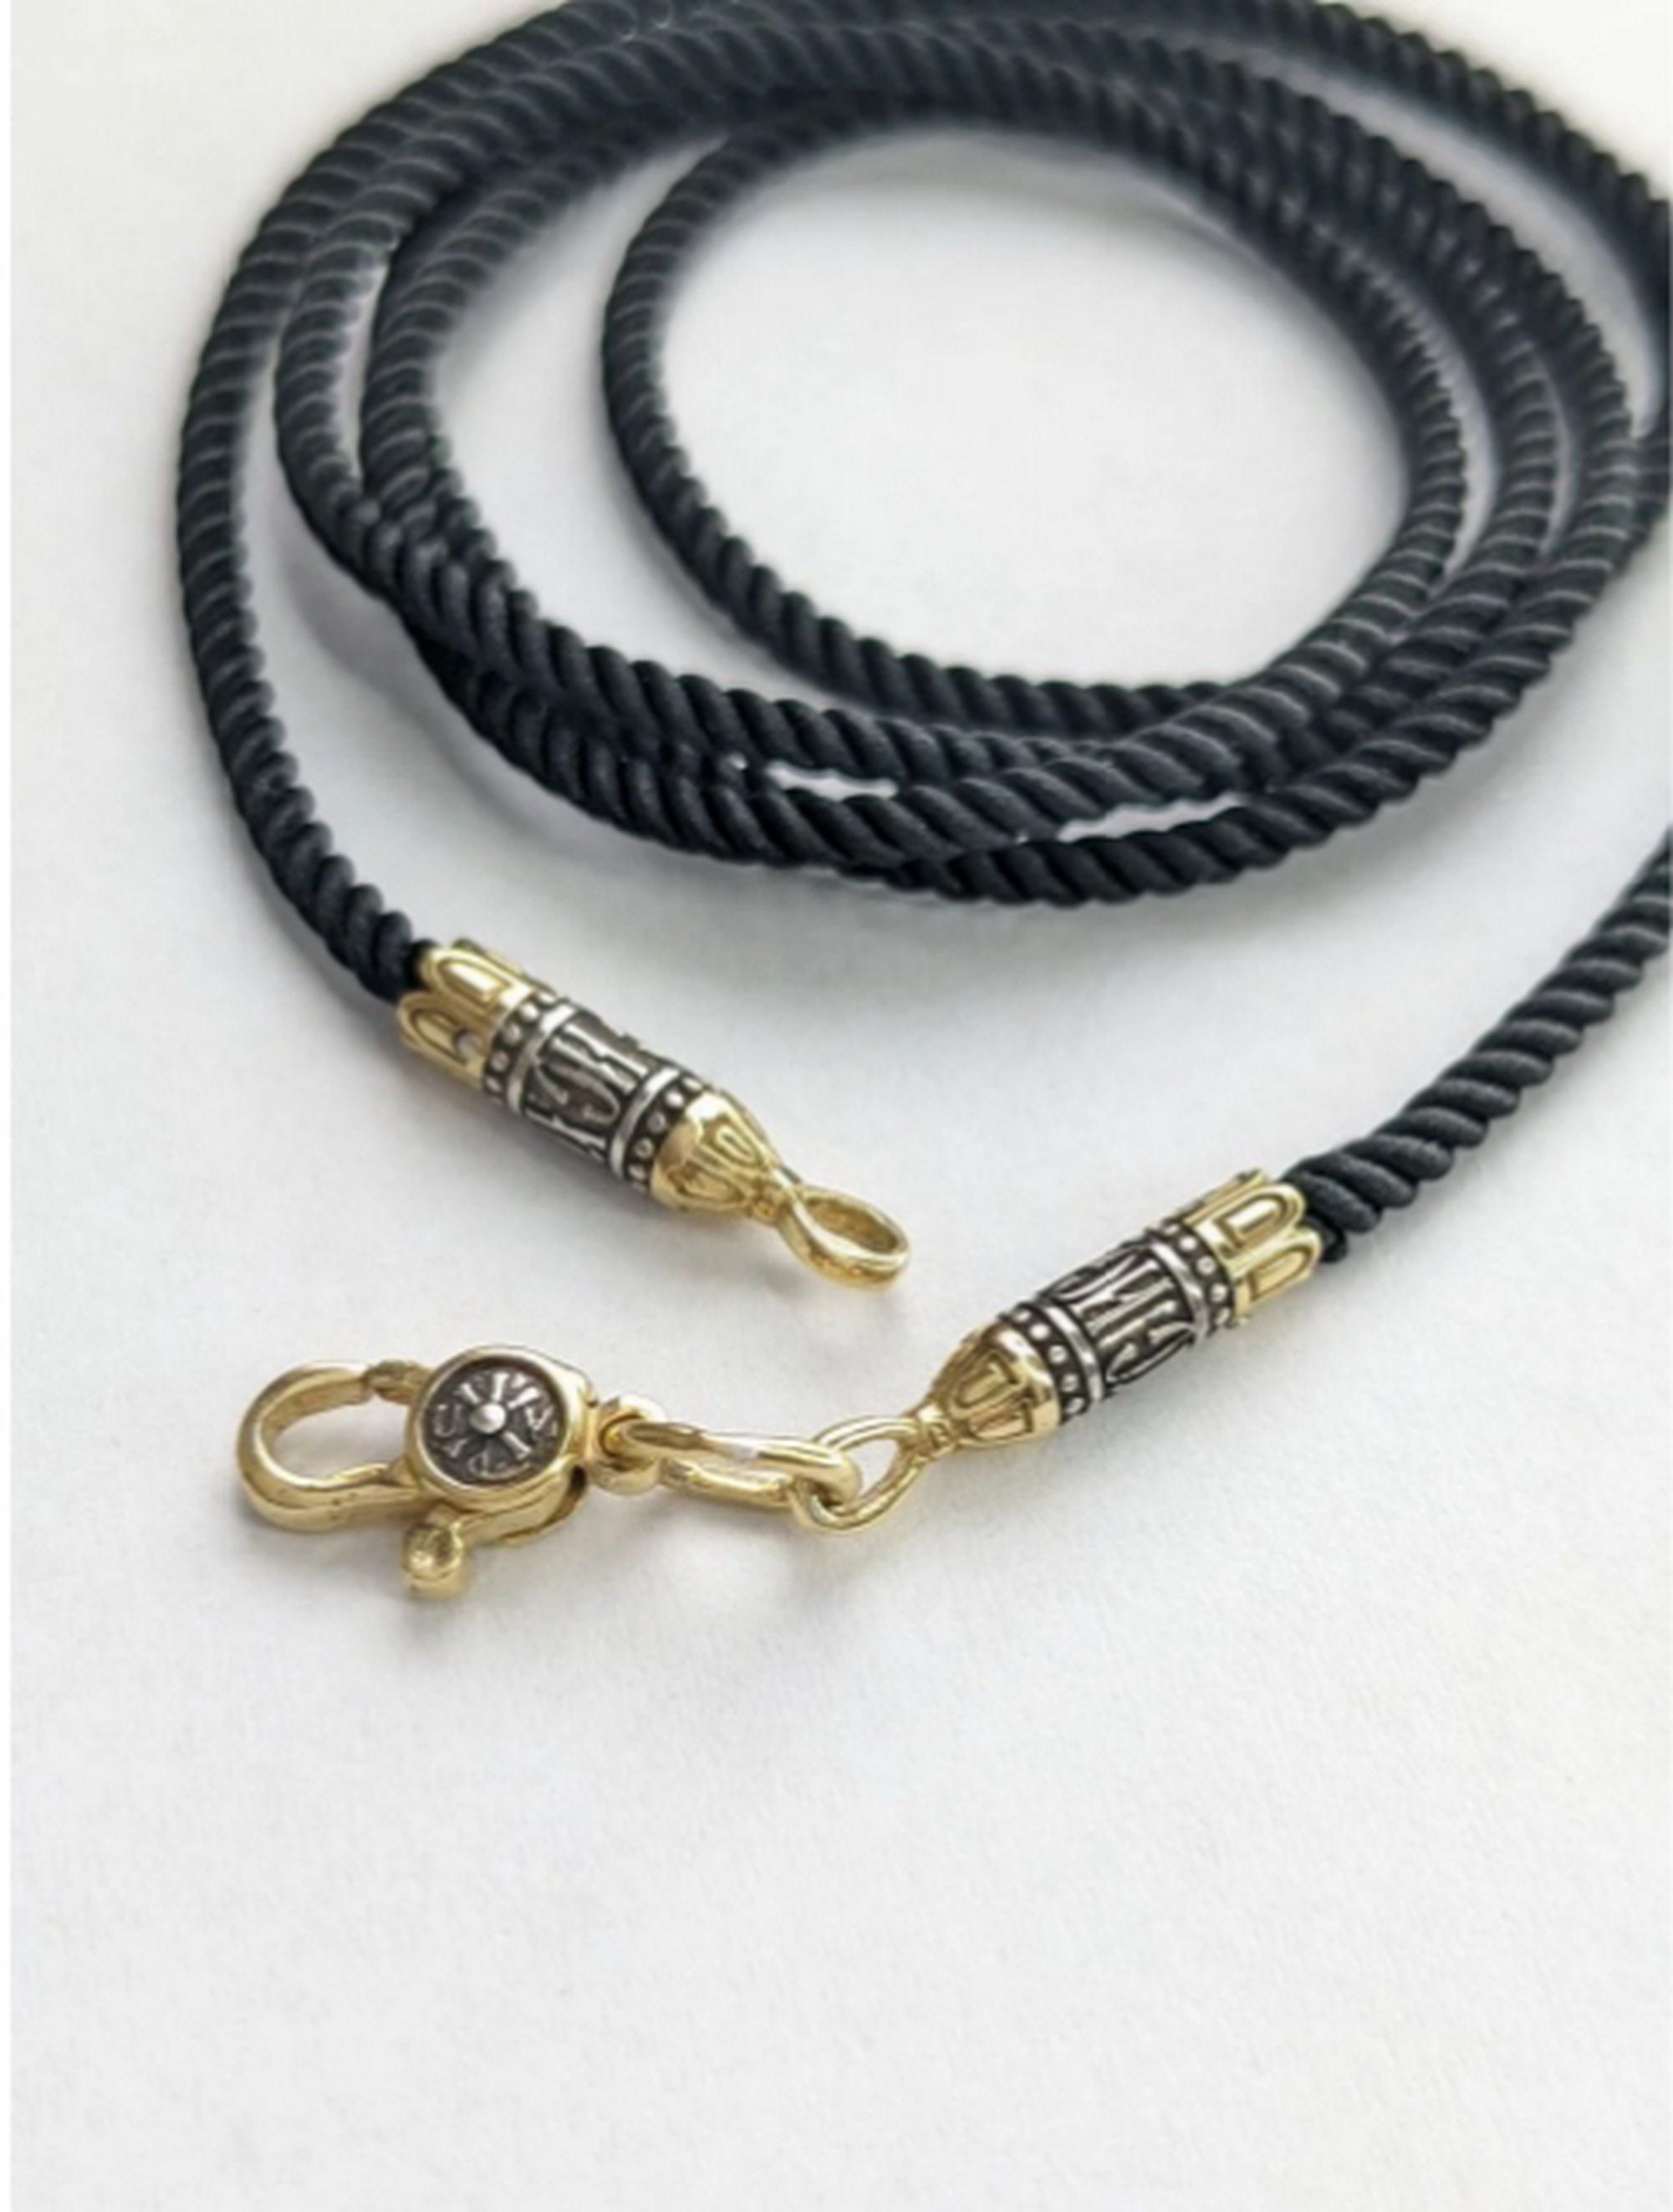 Handmade Black Cord Necklace Rope Braided Necklace Black Silk Cord Necklace  Diy